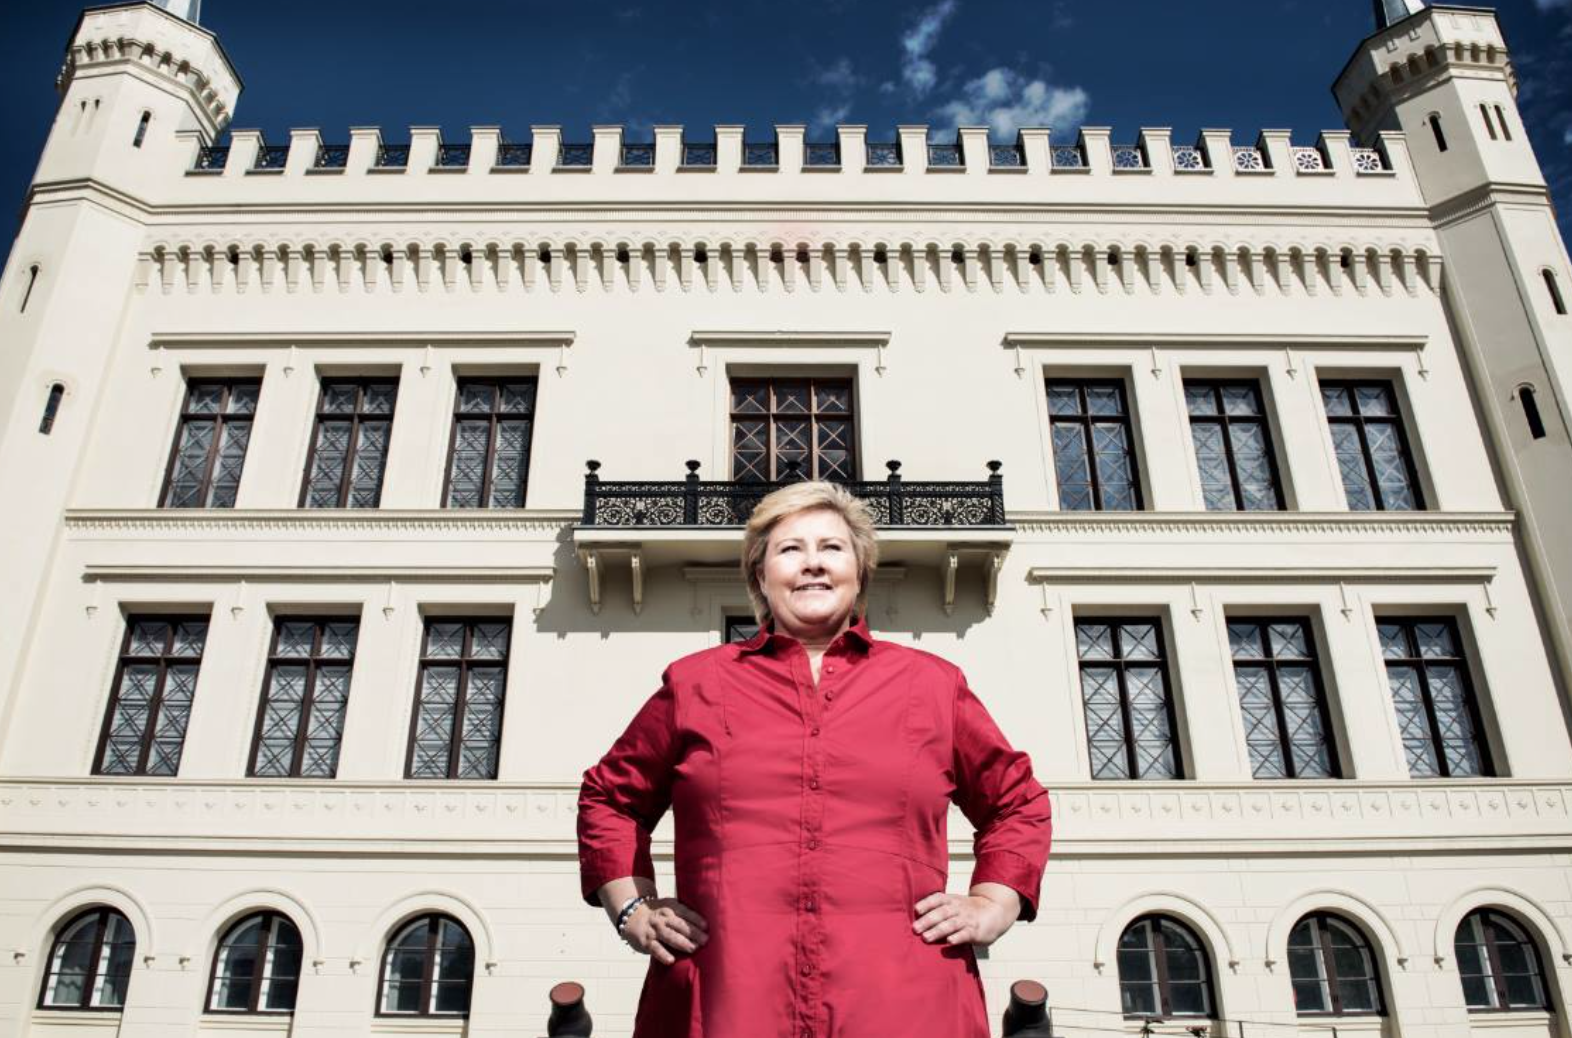 The Prime Minister of Norway - Erna Solberg